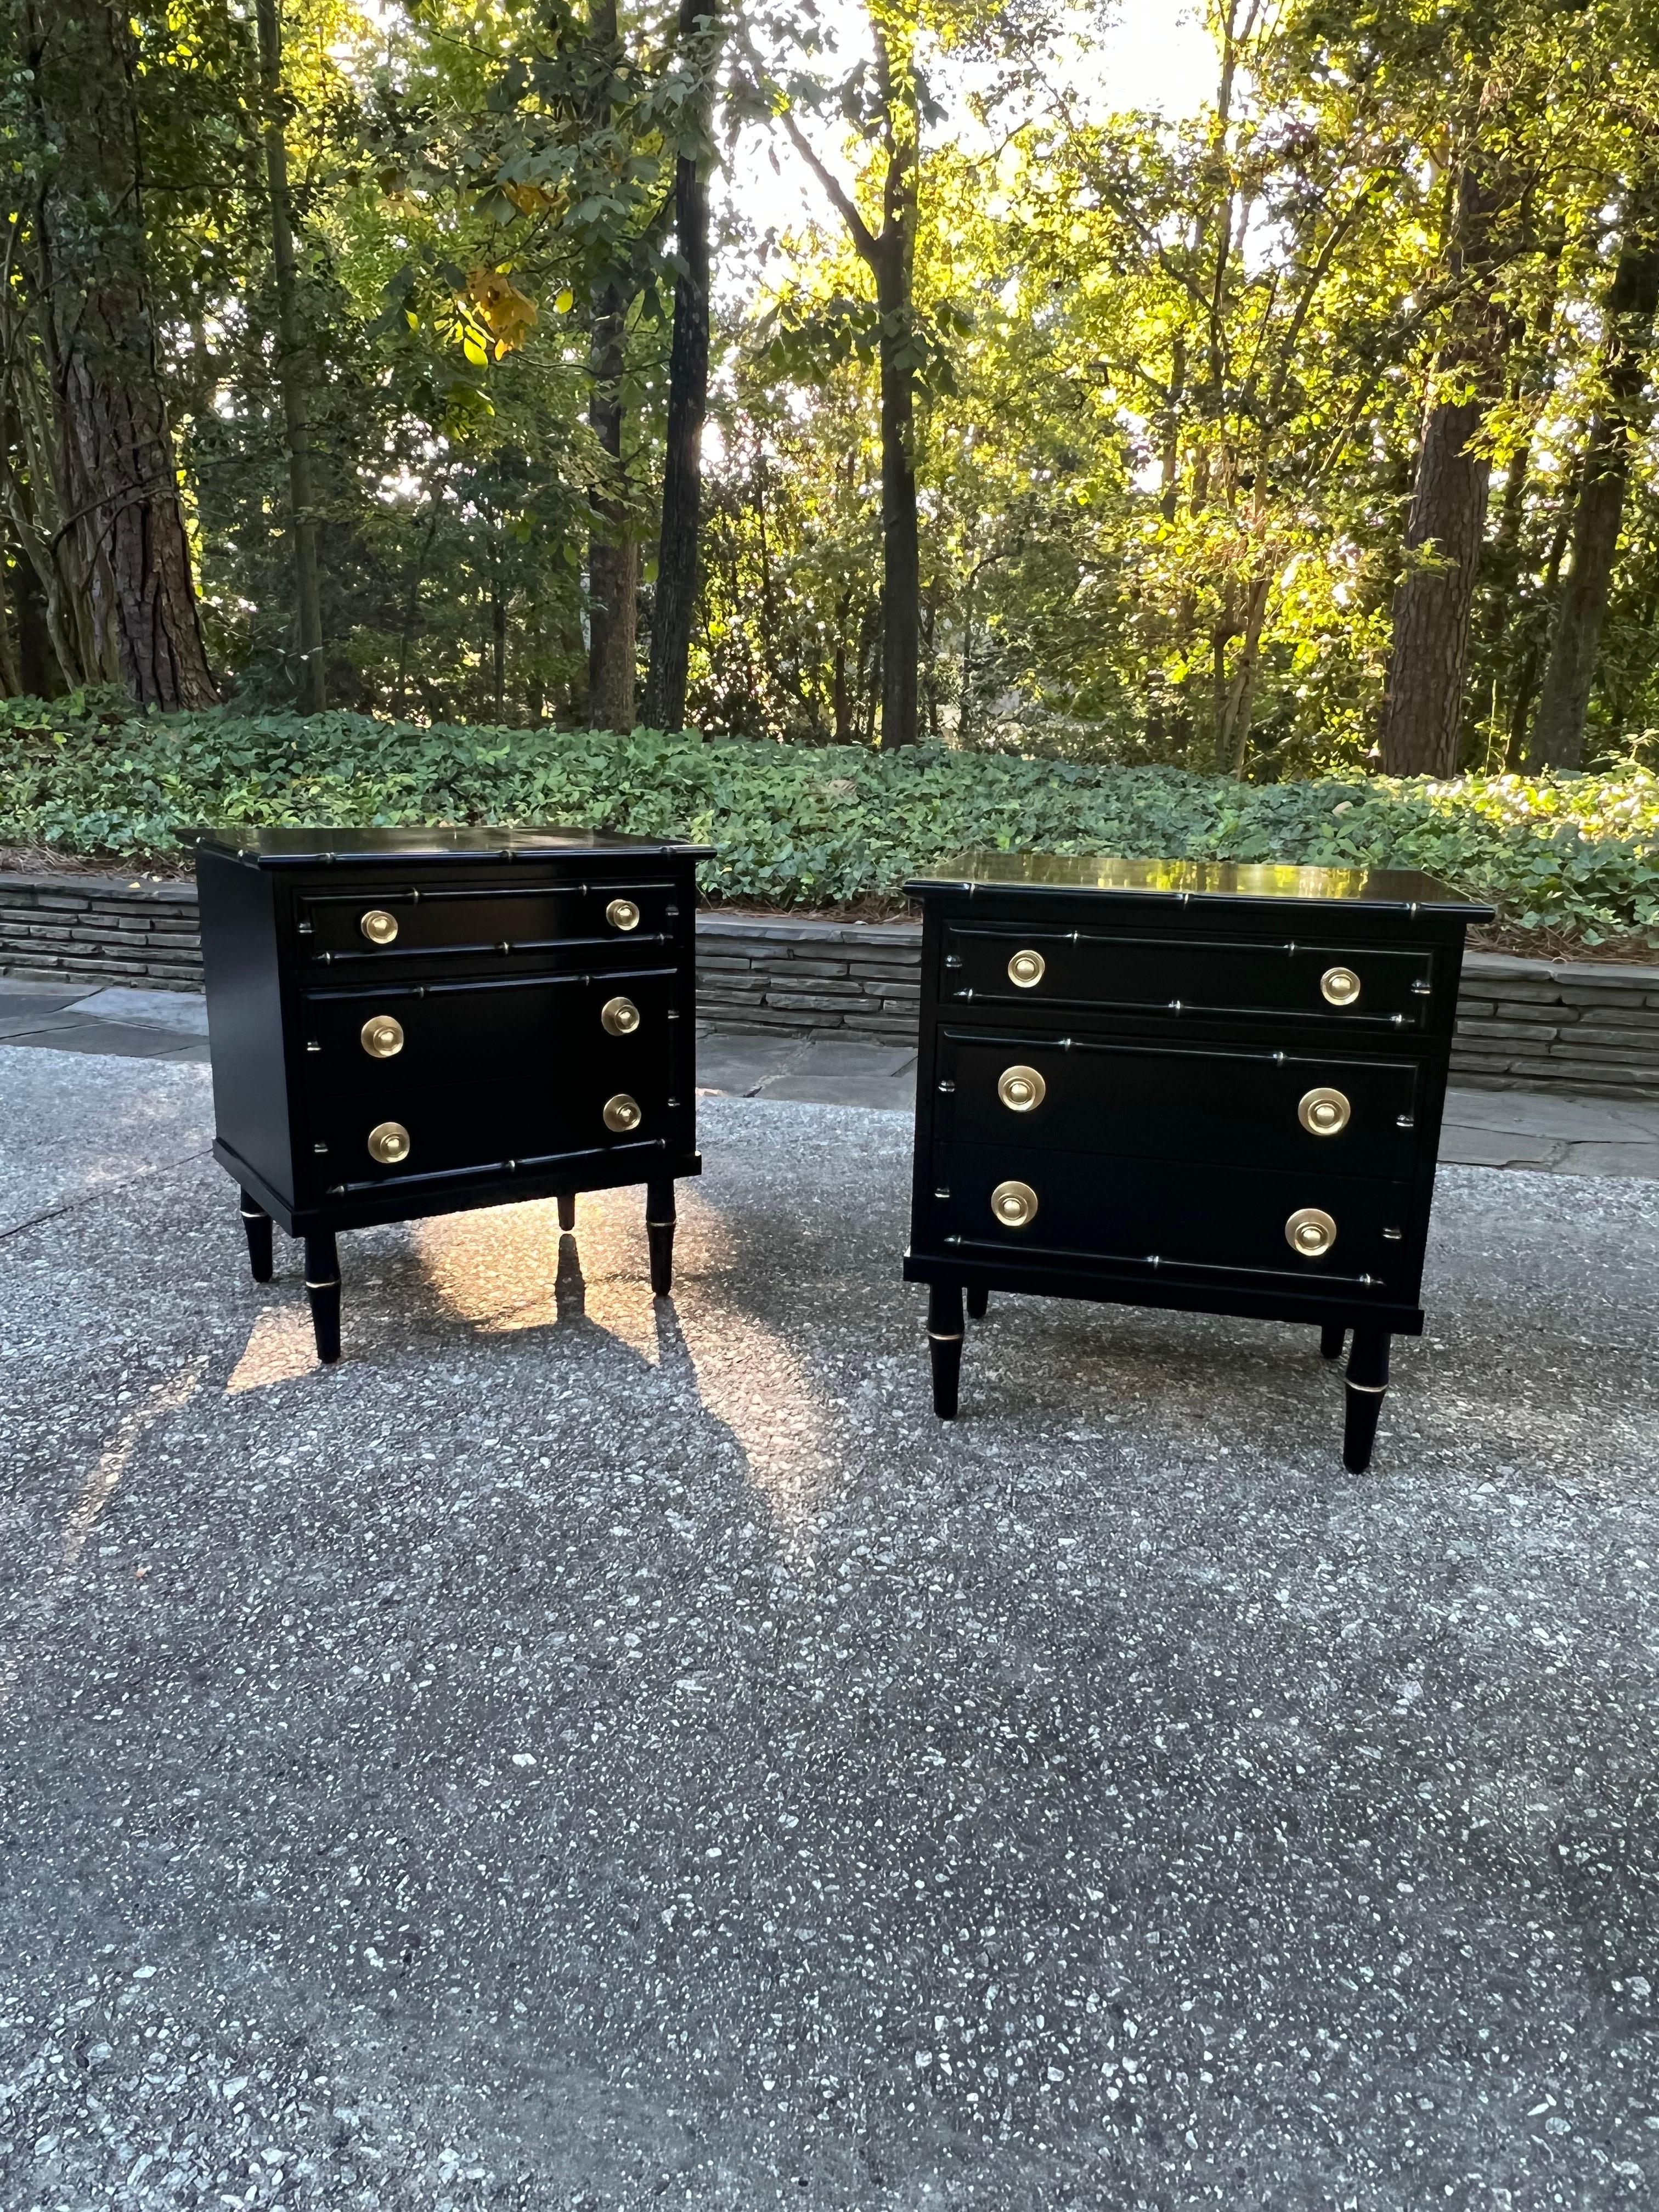 These magnificent small chests are shipped as professionally photographed and described in the listing narrative: Meticulously professionally restored and completely installation ready. 

An exquisite pair of meticulously restored black lacquer